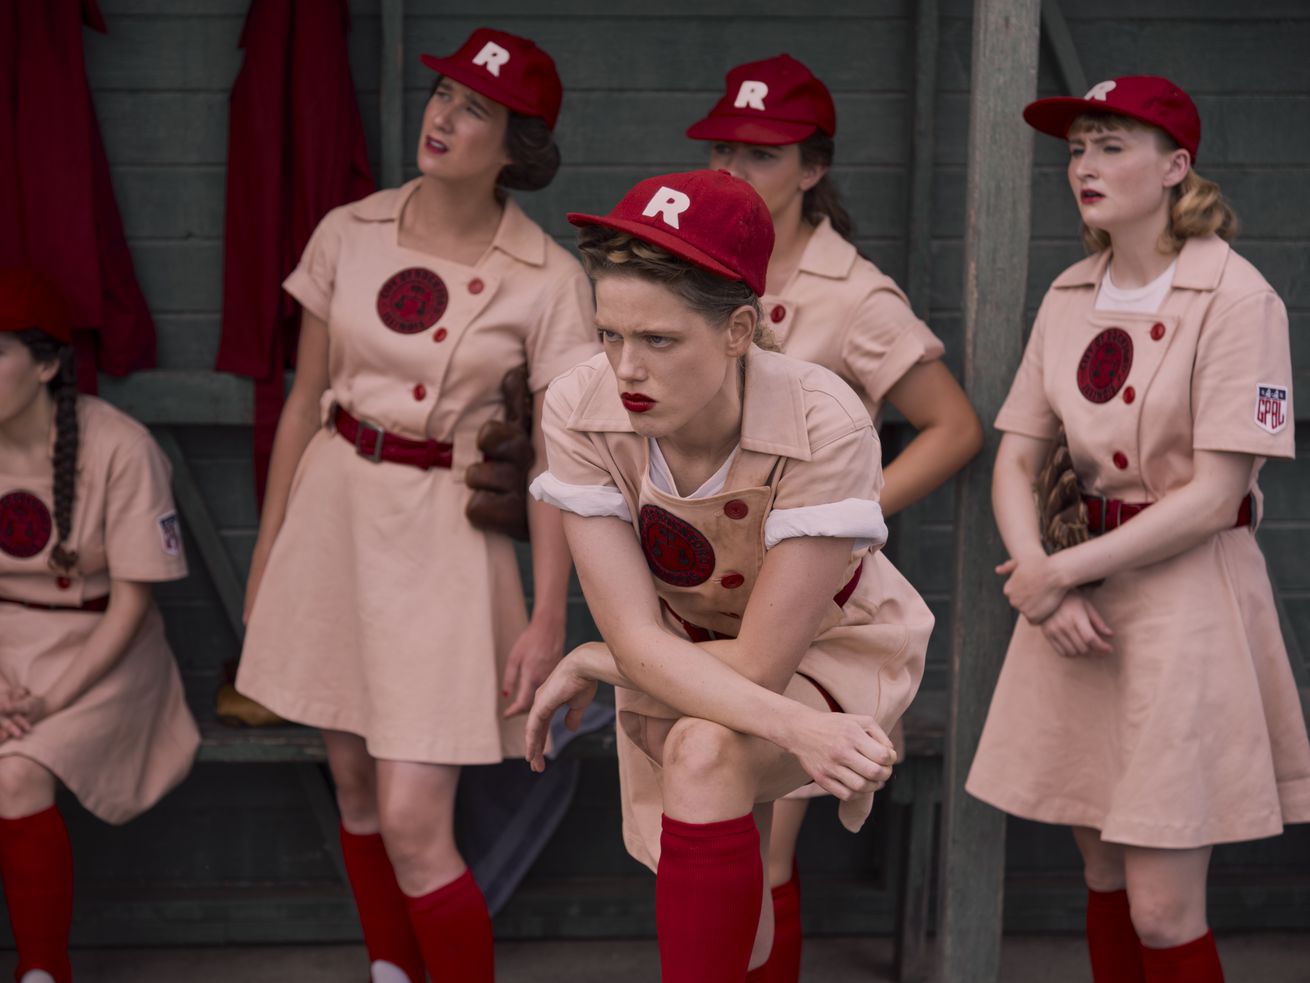 The new A League of Their Own TV show honors — and departs from — the original